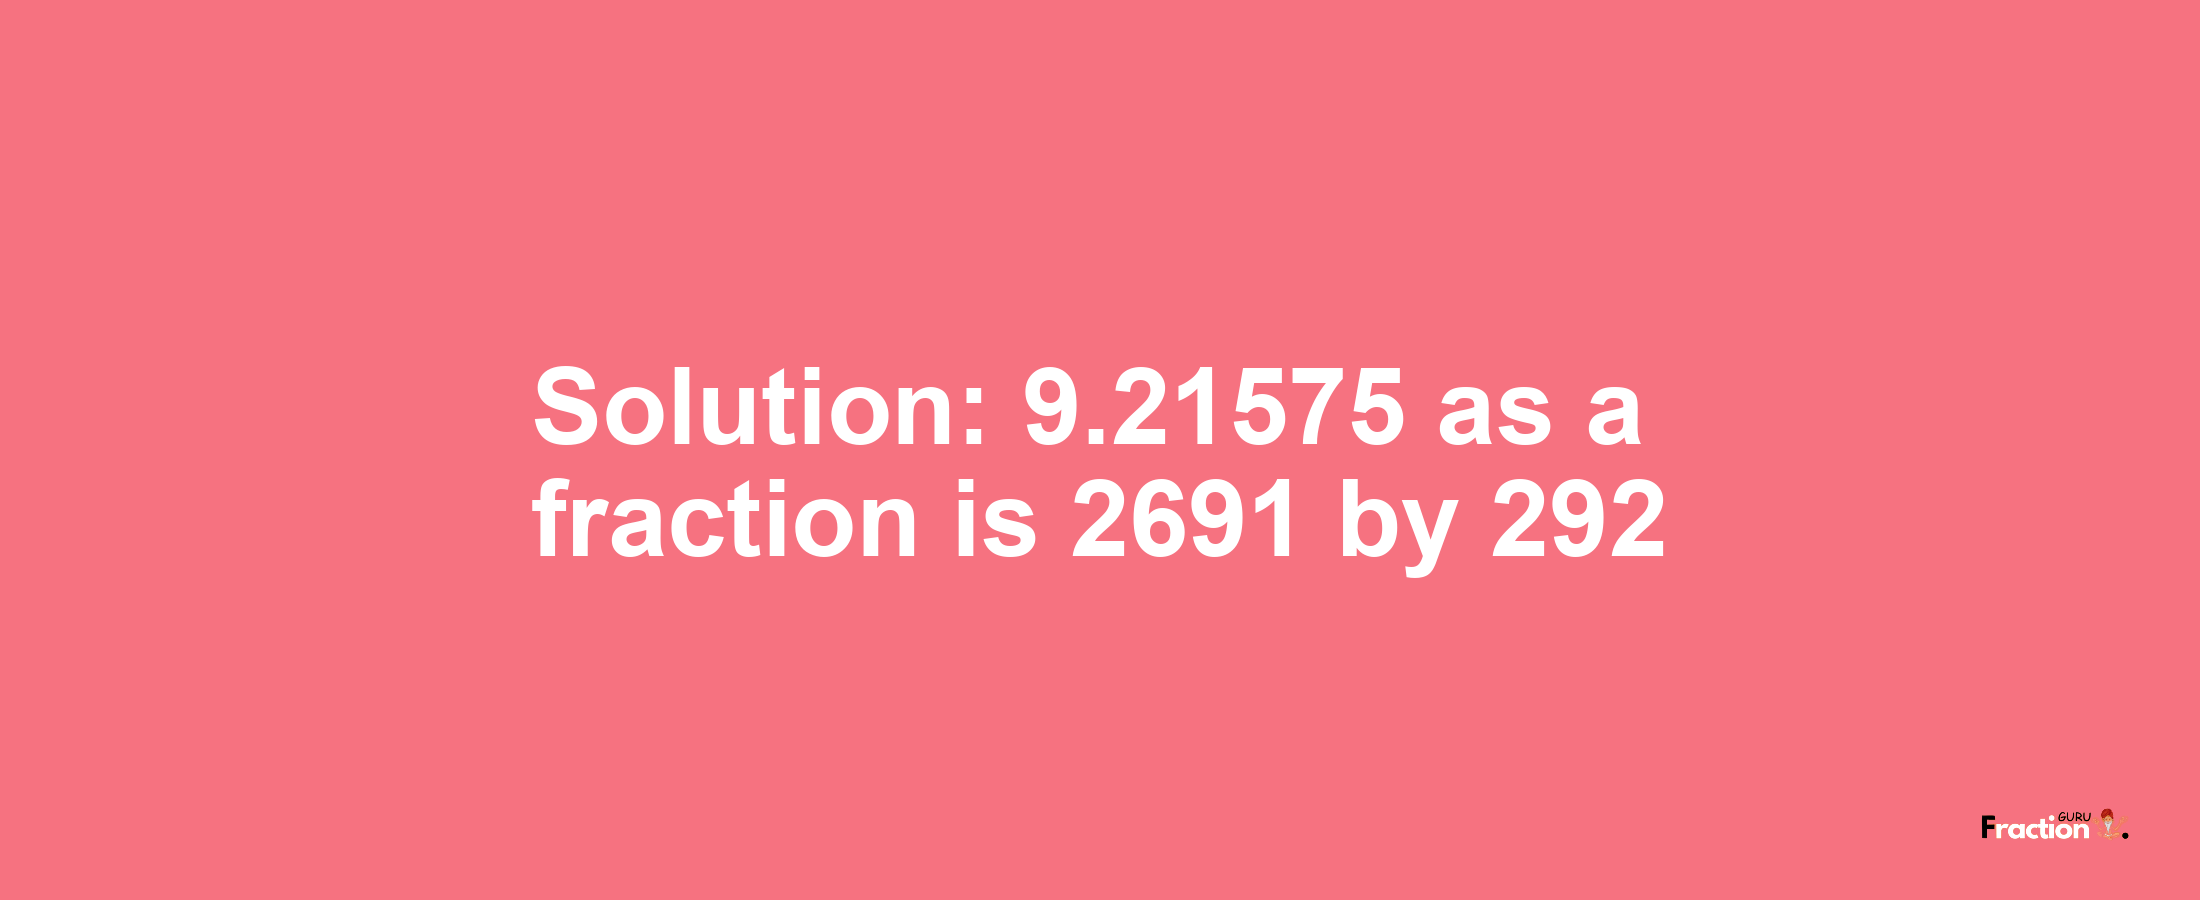 Solution:9.21575 as a fraction is 2691/292